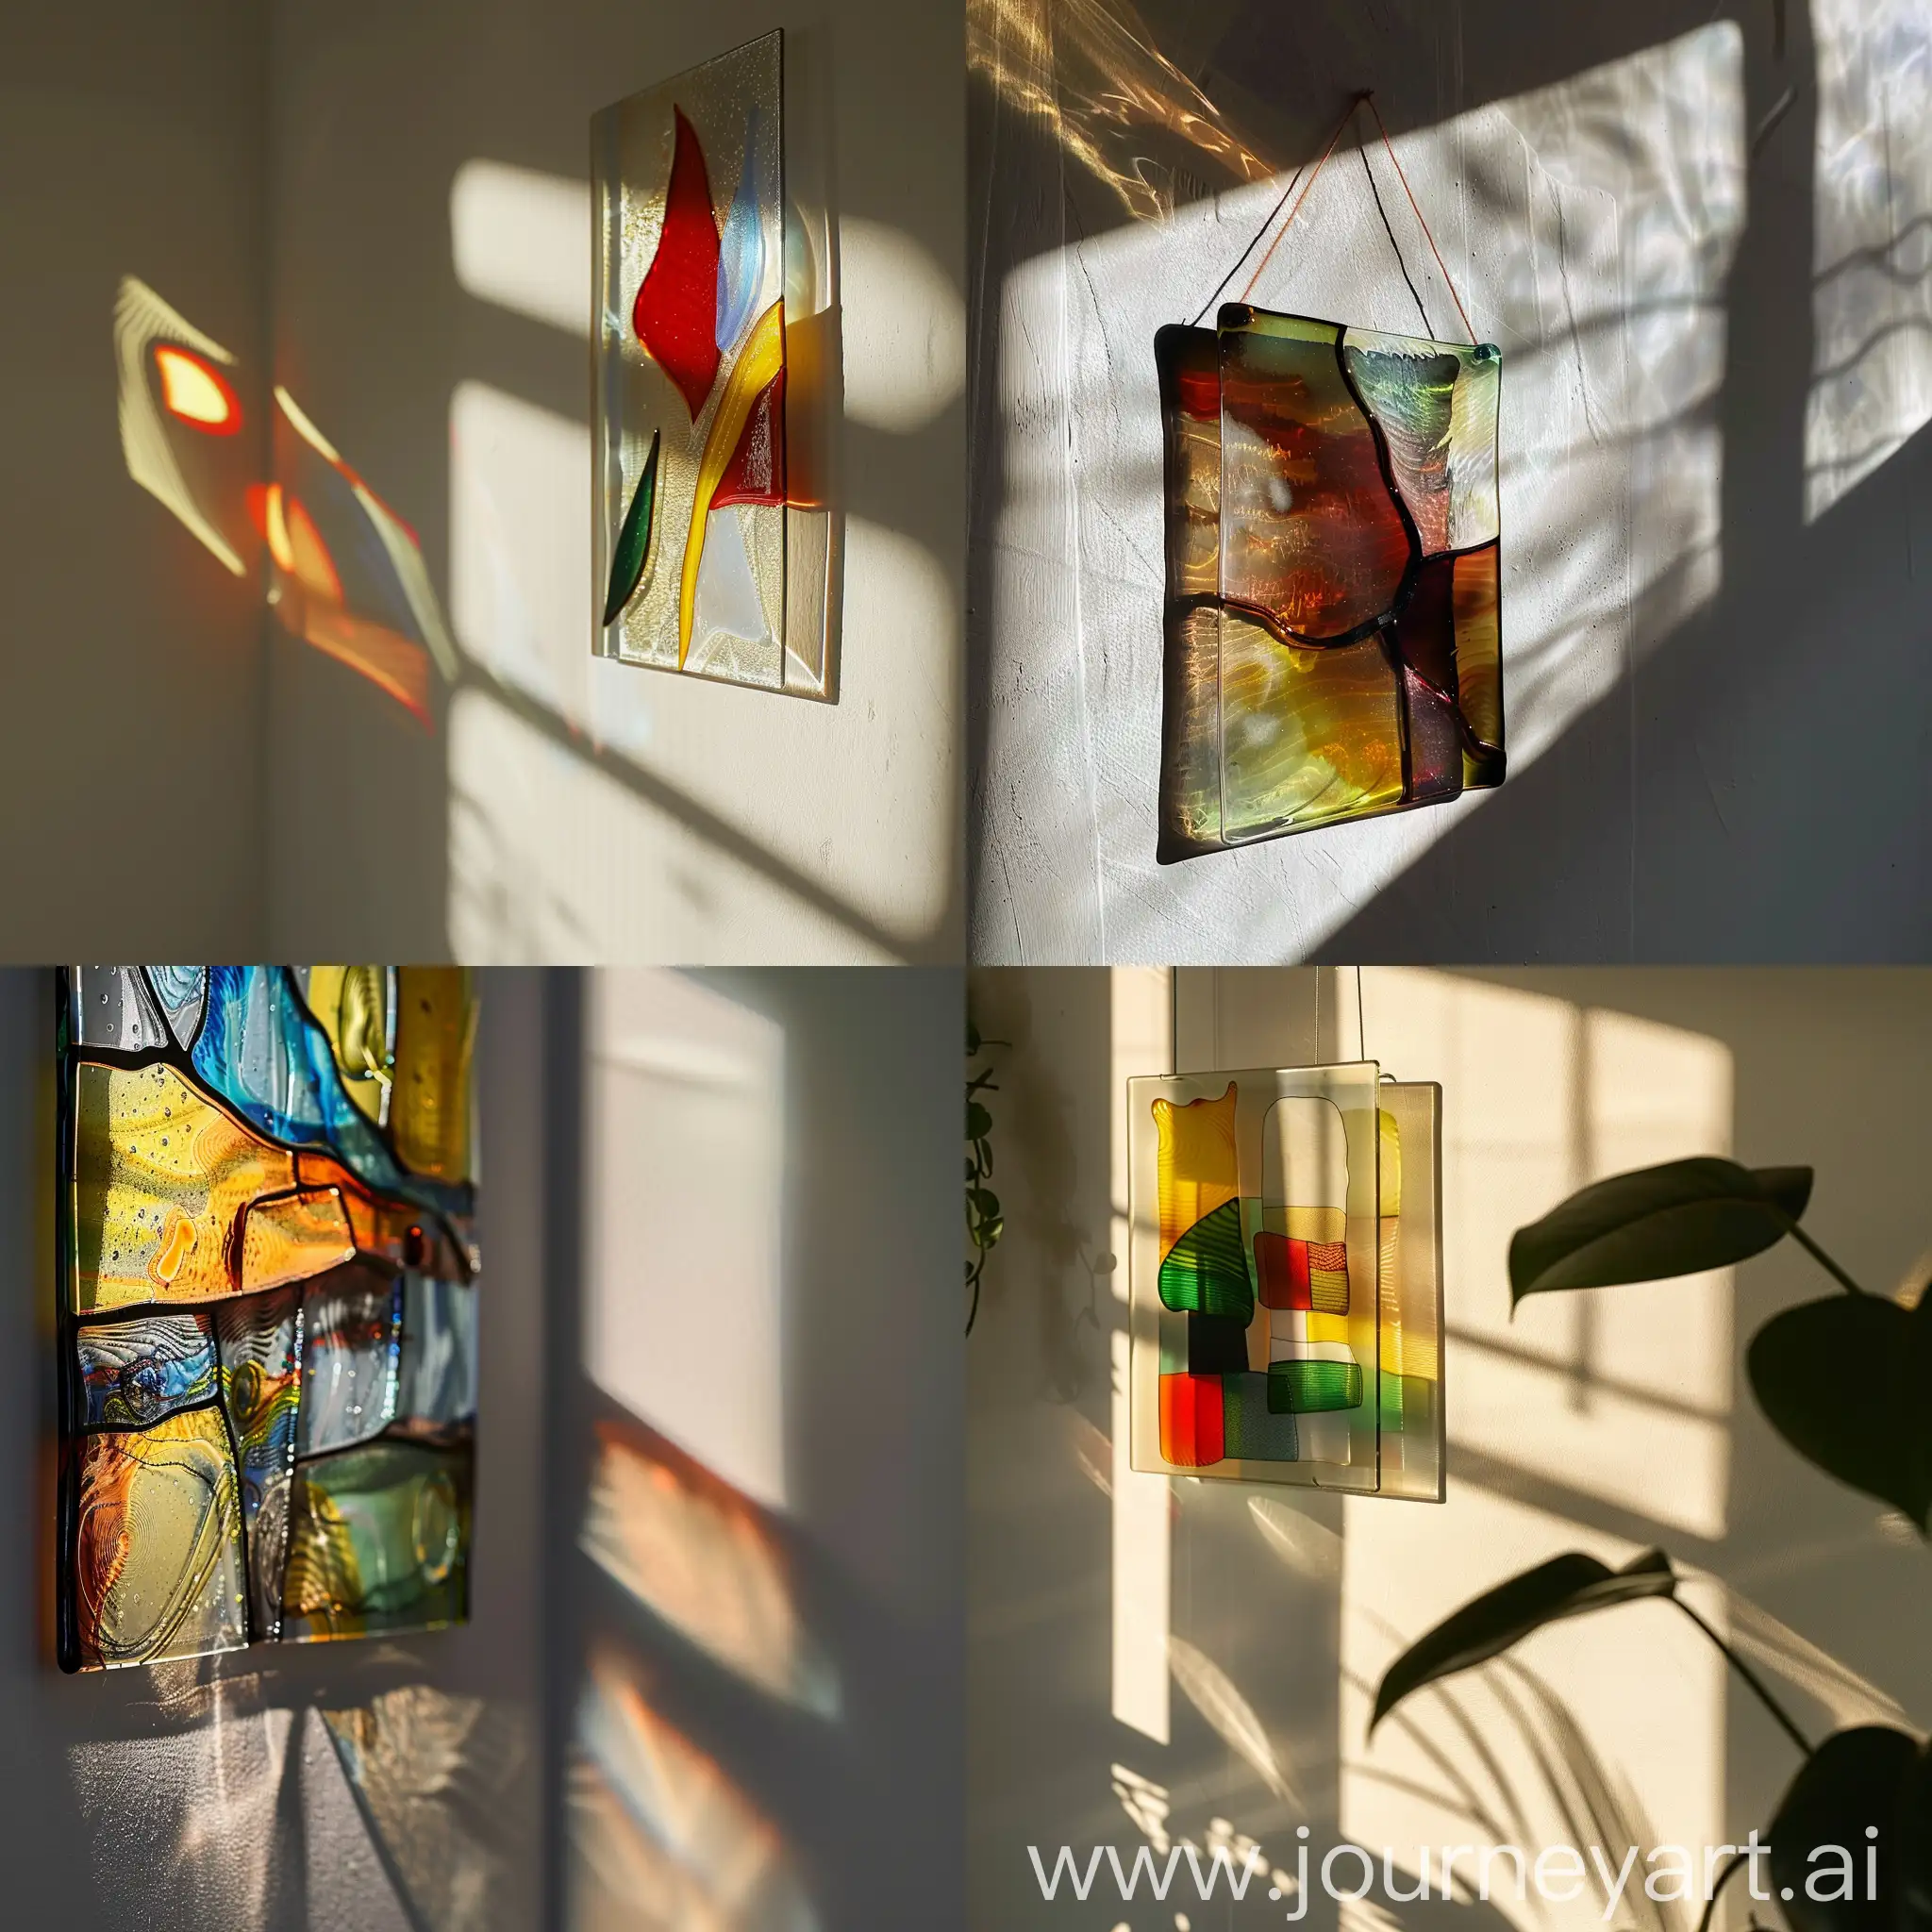 a close-up of a fused glass artwork hanging on the wall as its shadow is on the wall. It has stunning colors and it looks simple but very beautiful.